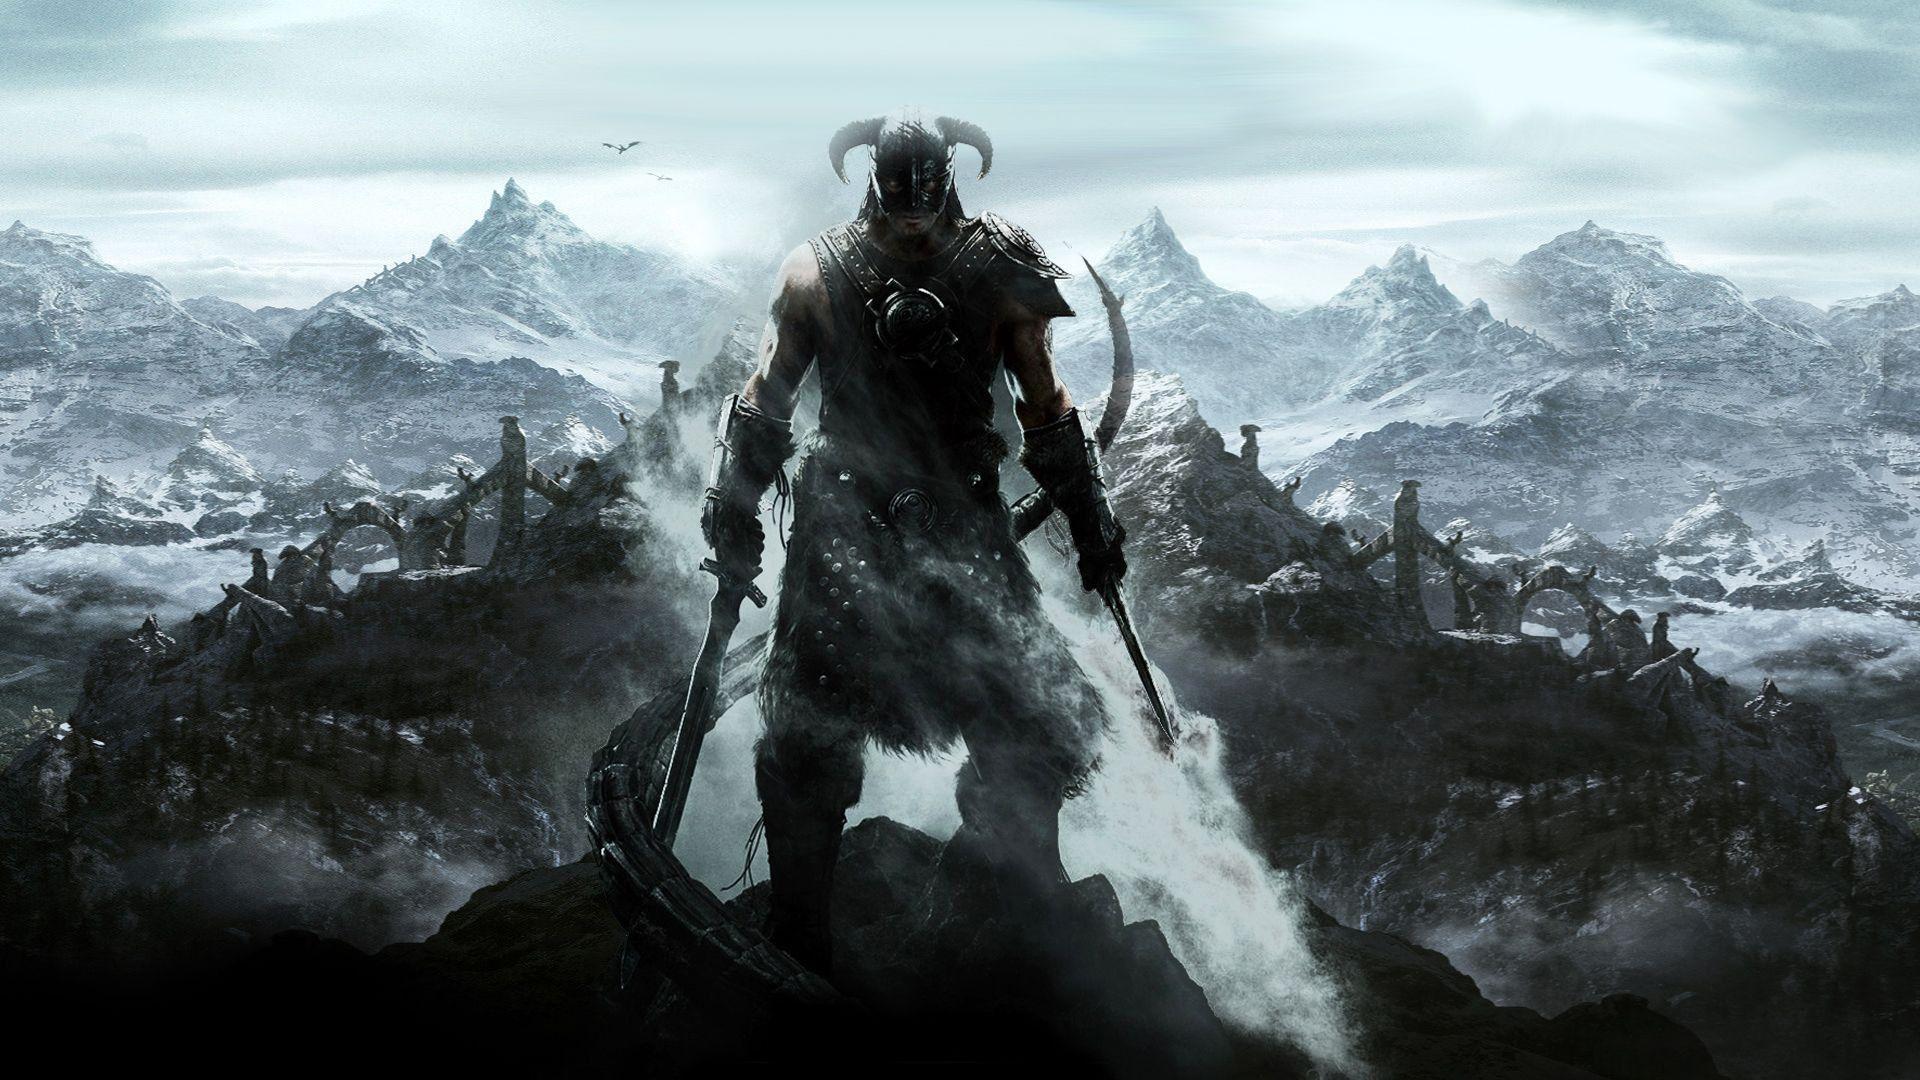 Skyrim Wallpaper Collection For Free Download. HD Wallpaper